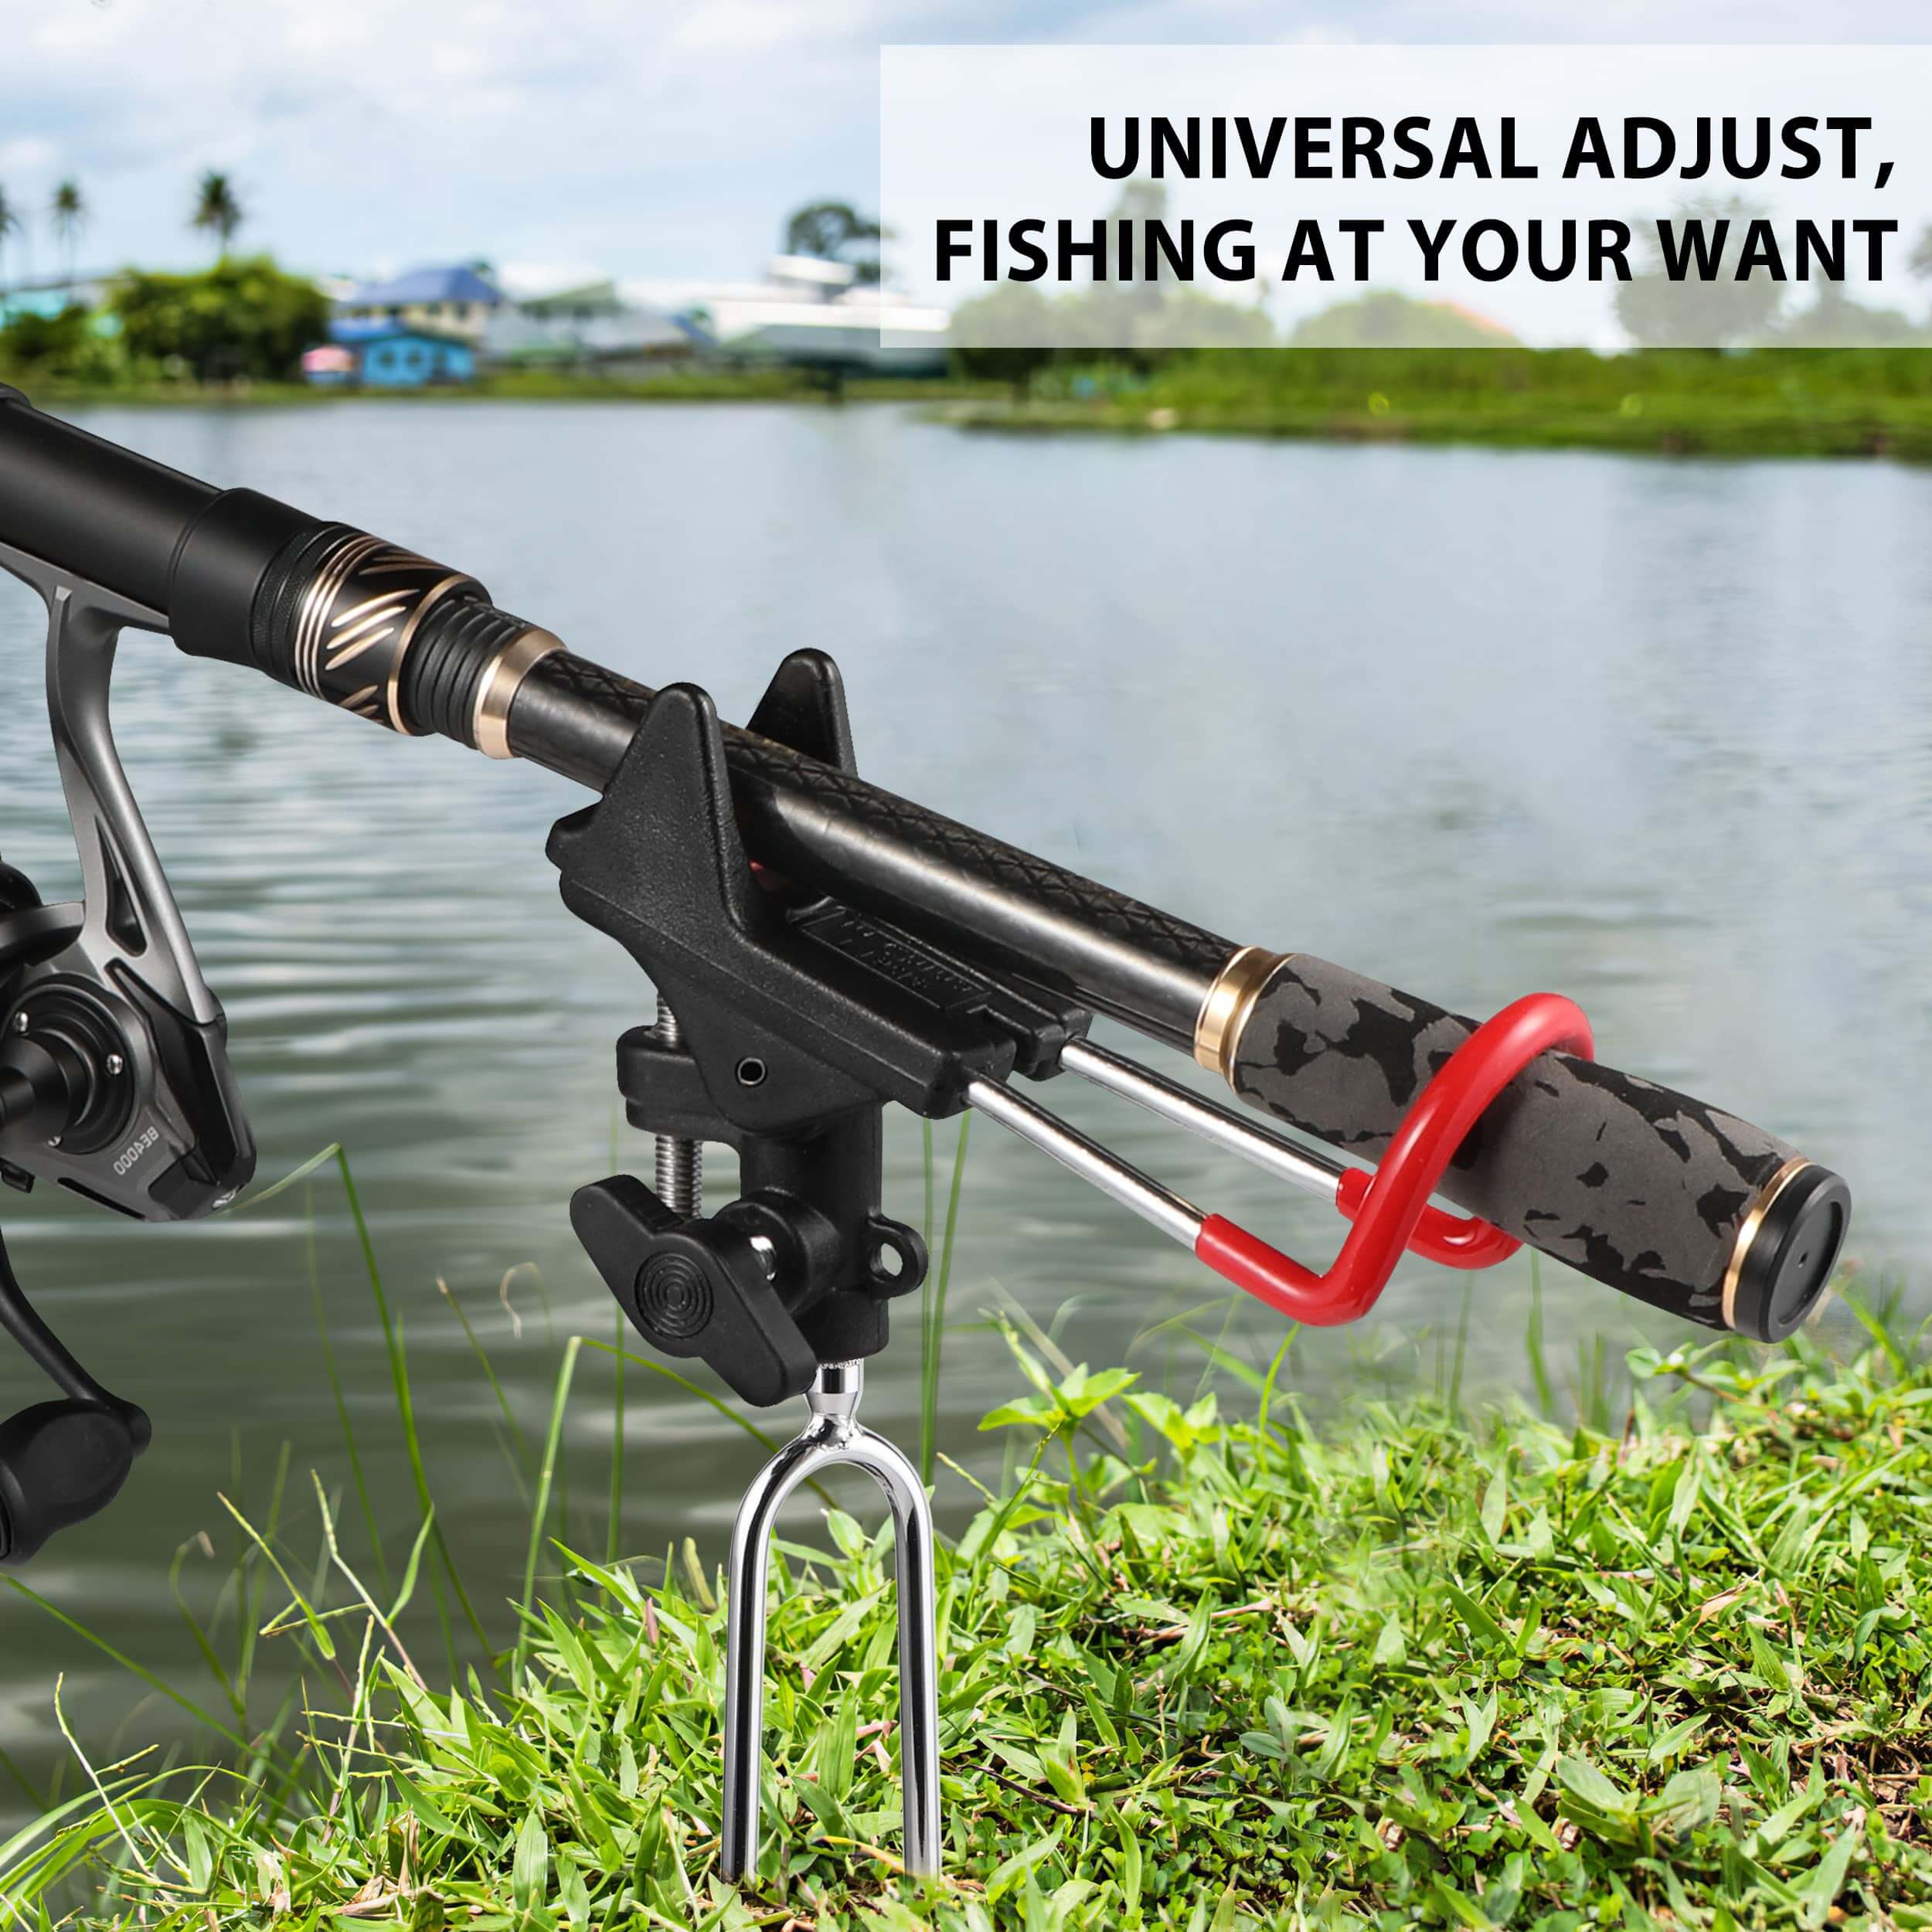 Fishing Rod Holders for Bank Fishing，Automatic Locking Bank Fishing Rod  Holders，360 Degree Adjustable Fishing Pole Stand ，2 Pack Upgraded Fishing  Pole